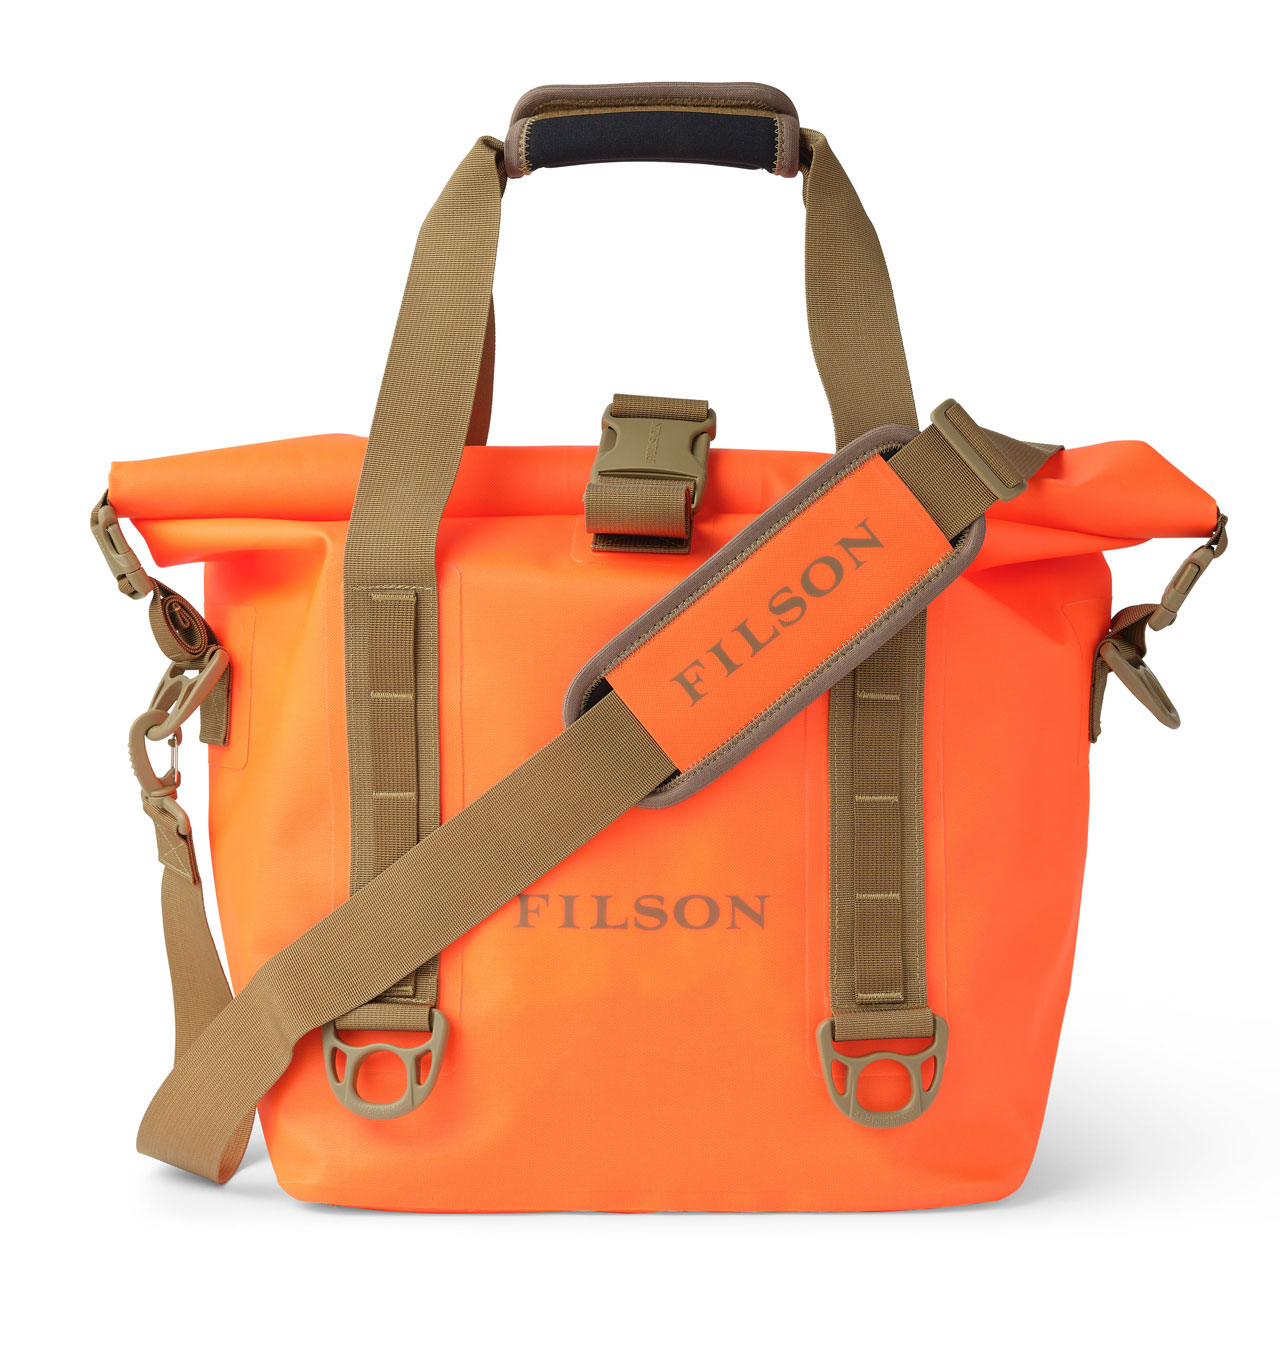 Filson - Dry Roll-Top Tote Bag - Flame